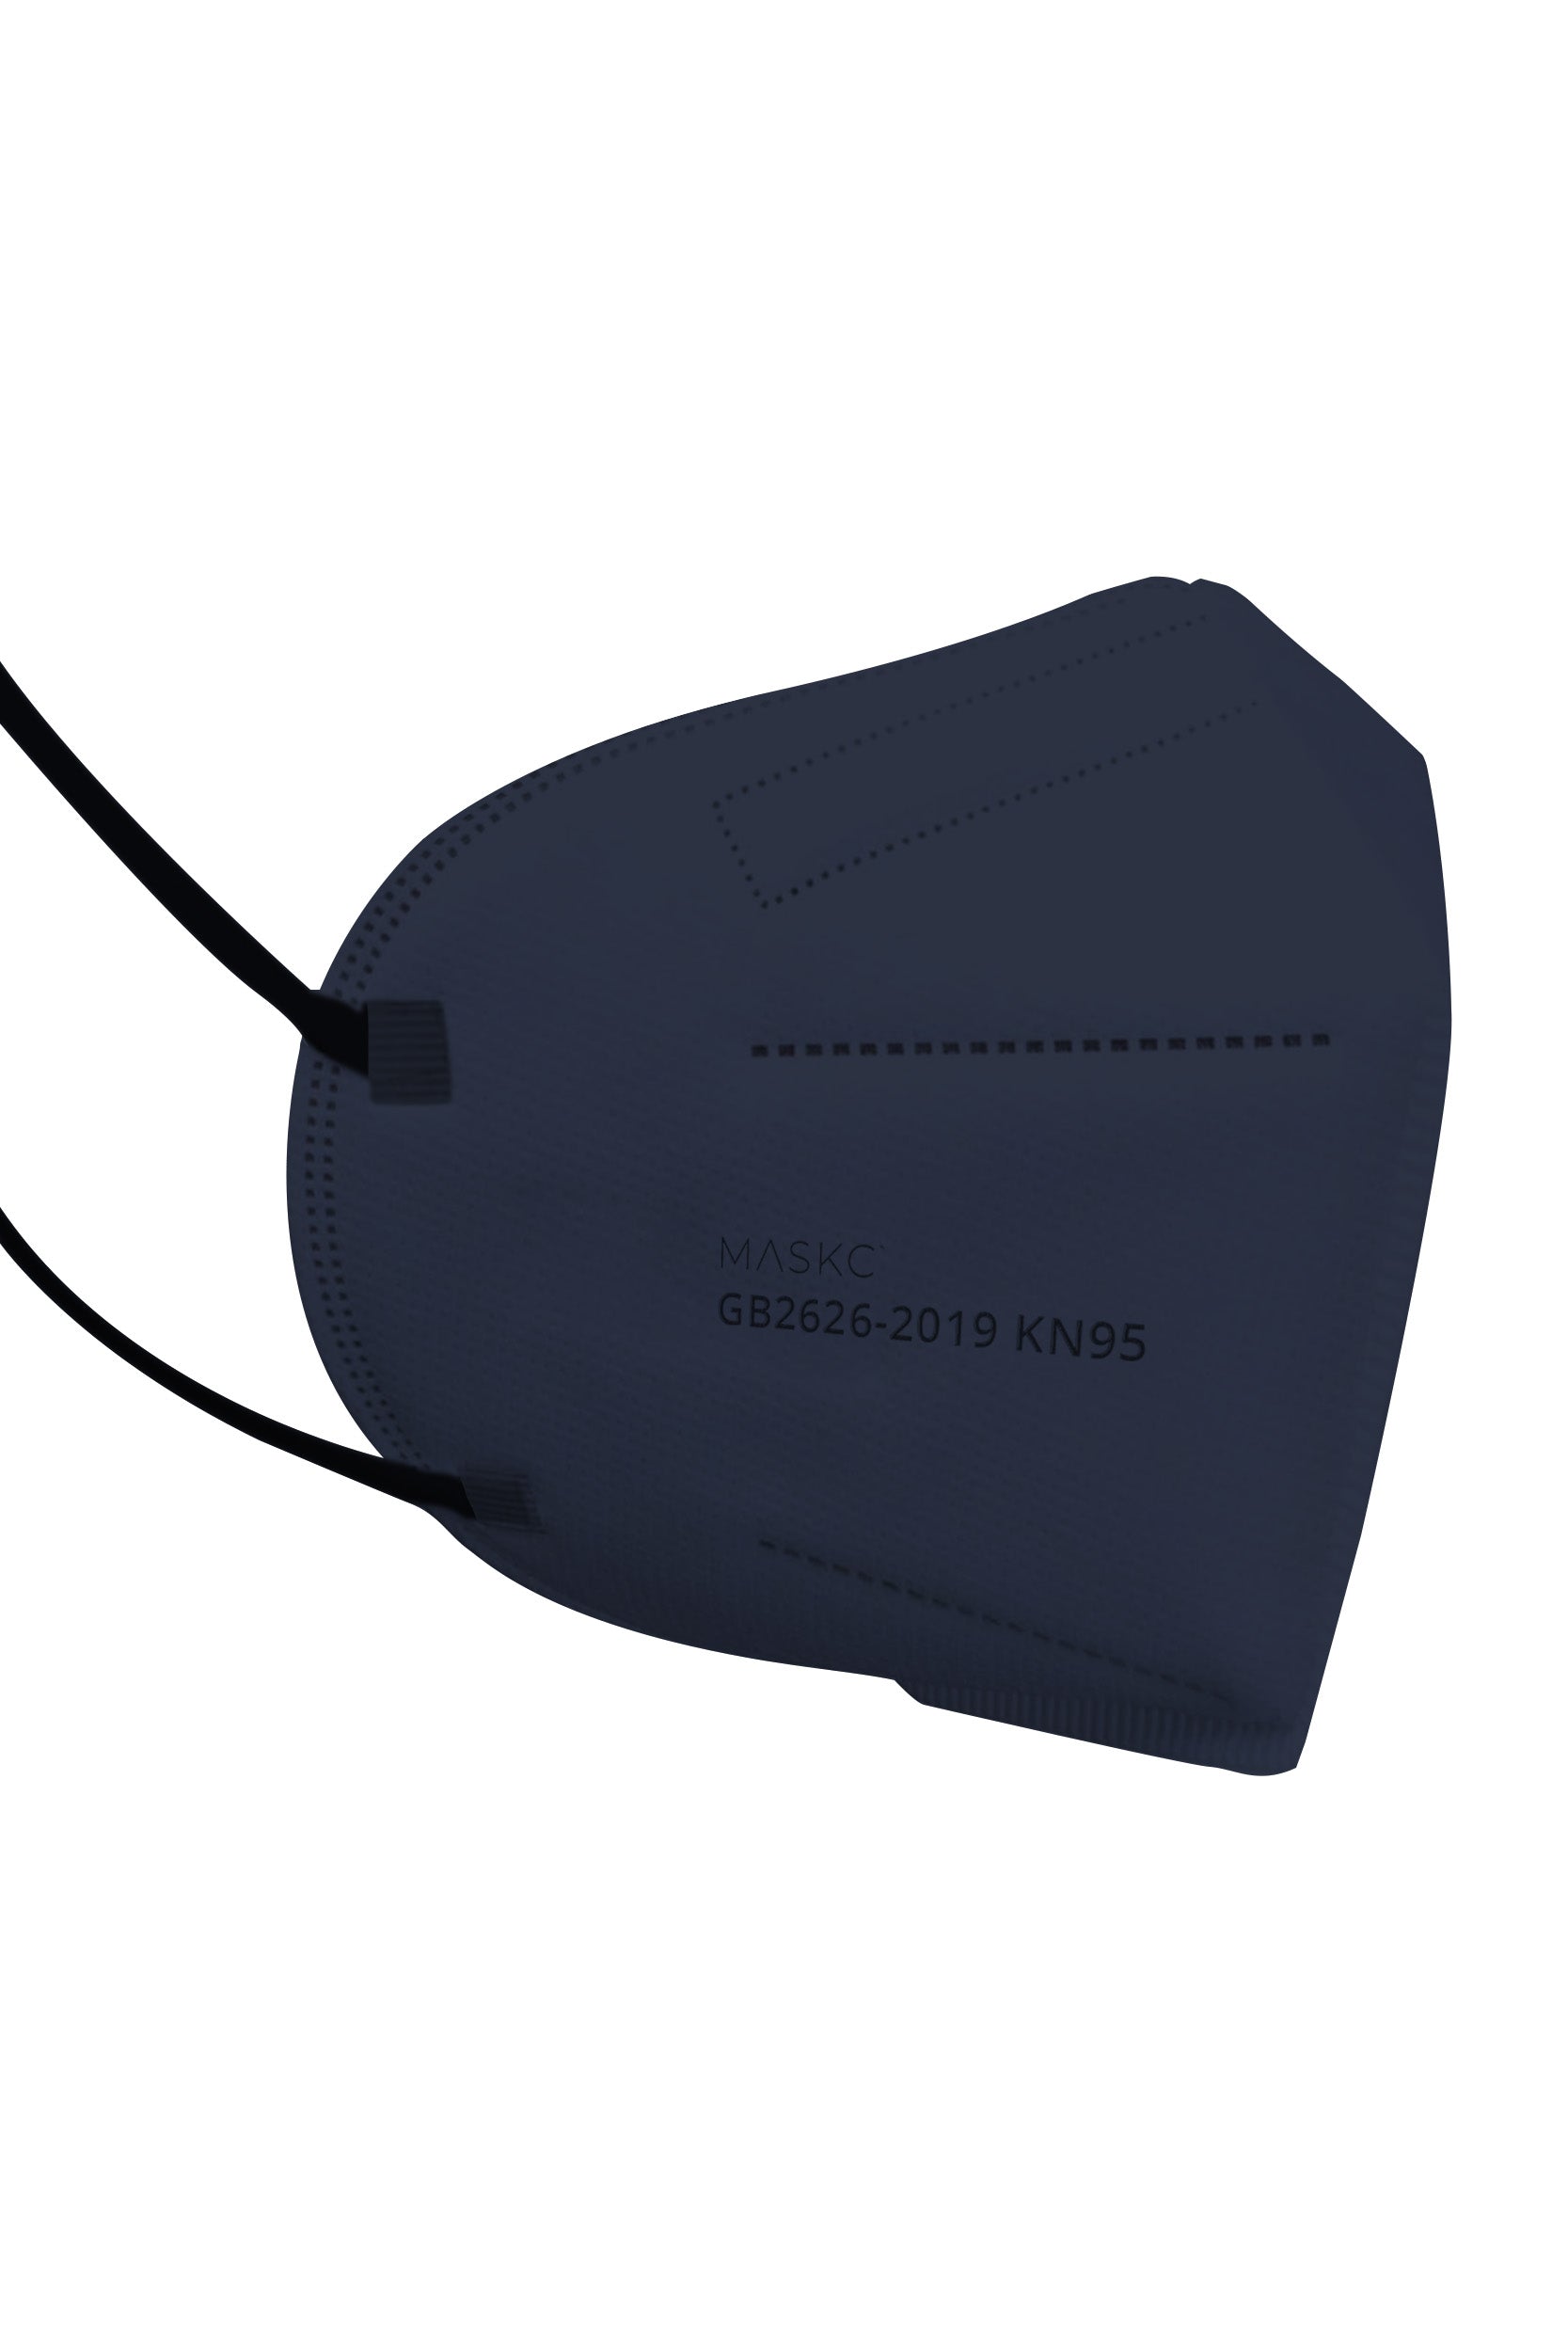 Stylish Kids Size Navy KN95 face mask, with soft black ear loops and high quality fabric. 